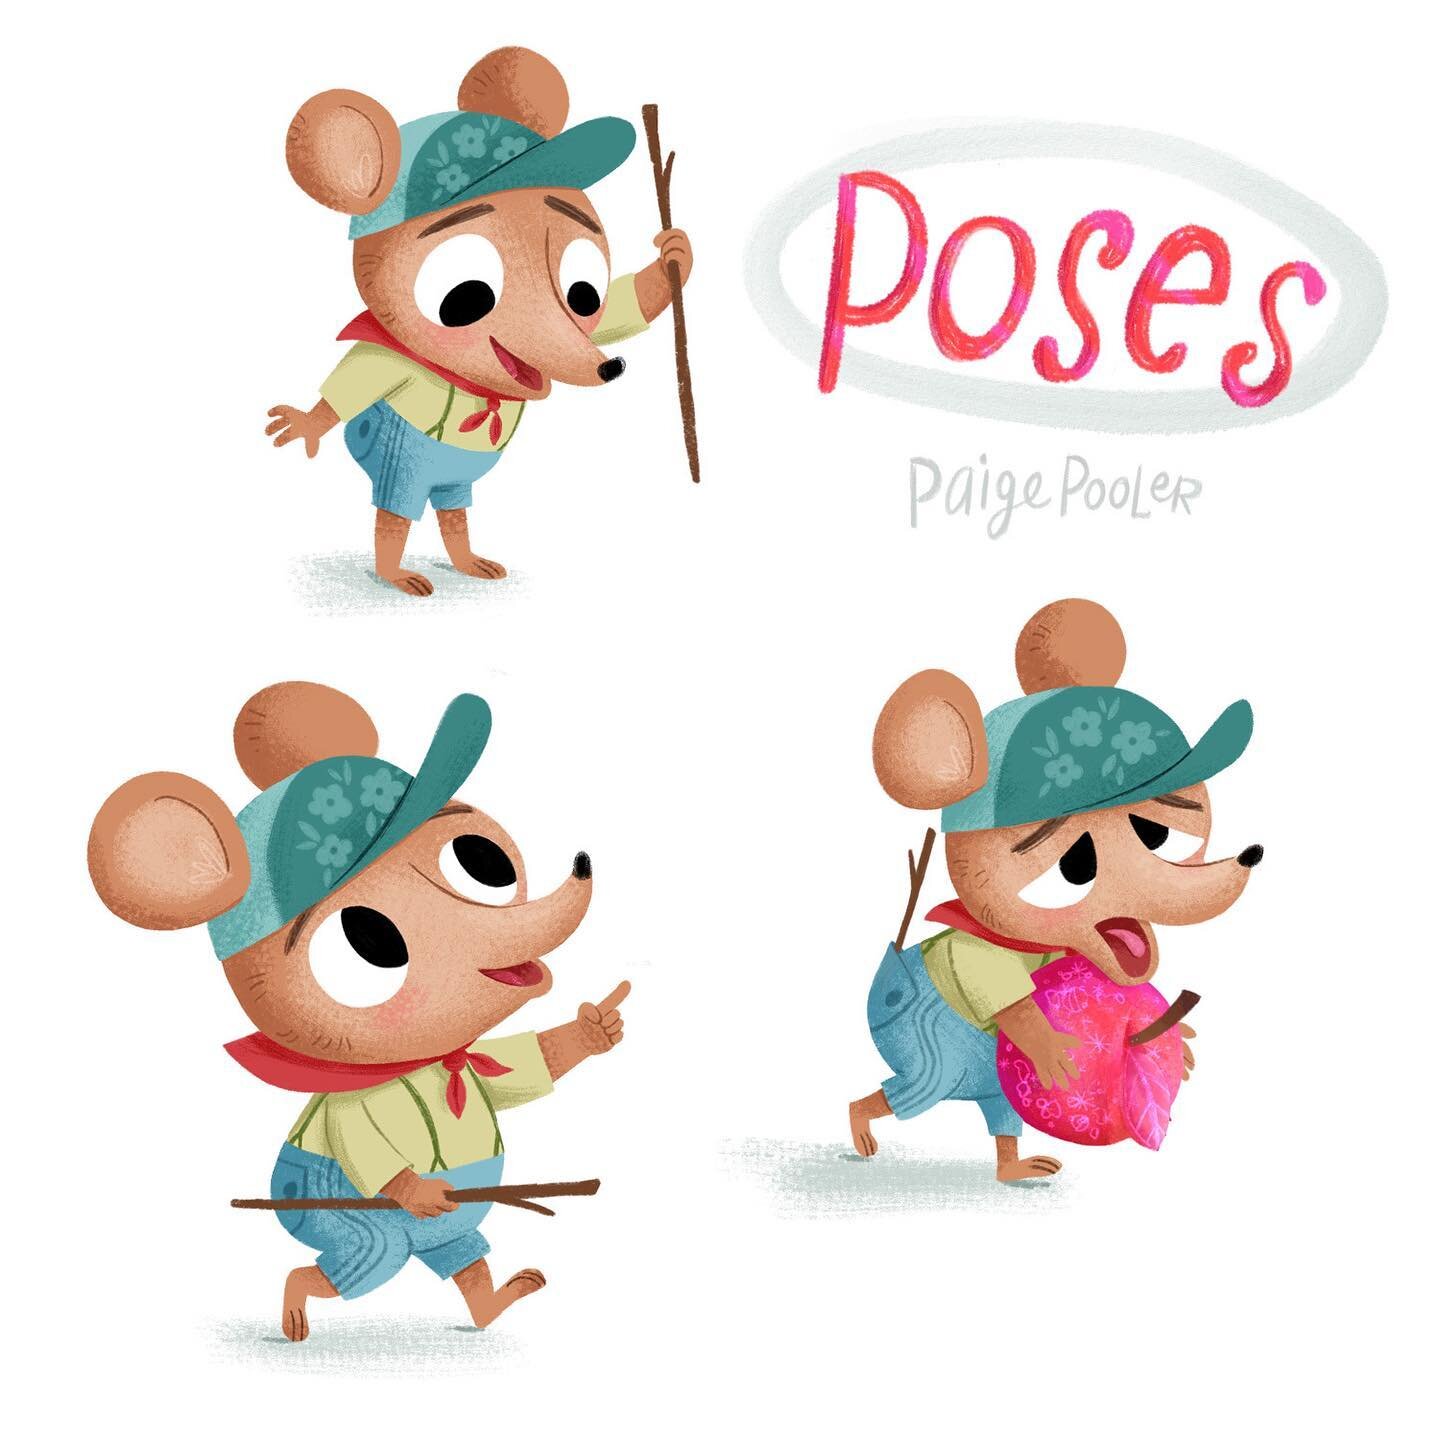 Some character poses for MATS Illustrate Children&rsquo;s book class! I think Pika is my fav character. #matsicb9 
Story- &ldquo;The Enchanted Apple&rdquo; by @zoe_tucker_design 
.

#makeartthatsells #matsicb9 #characterdev  #character #kidslitart #c